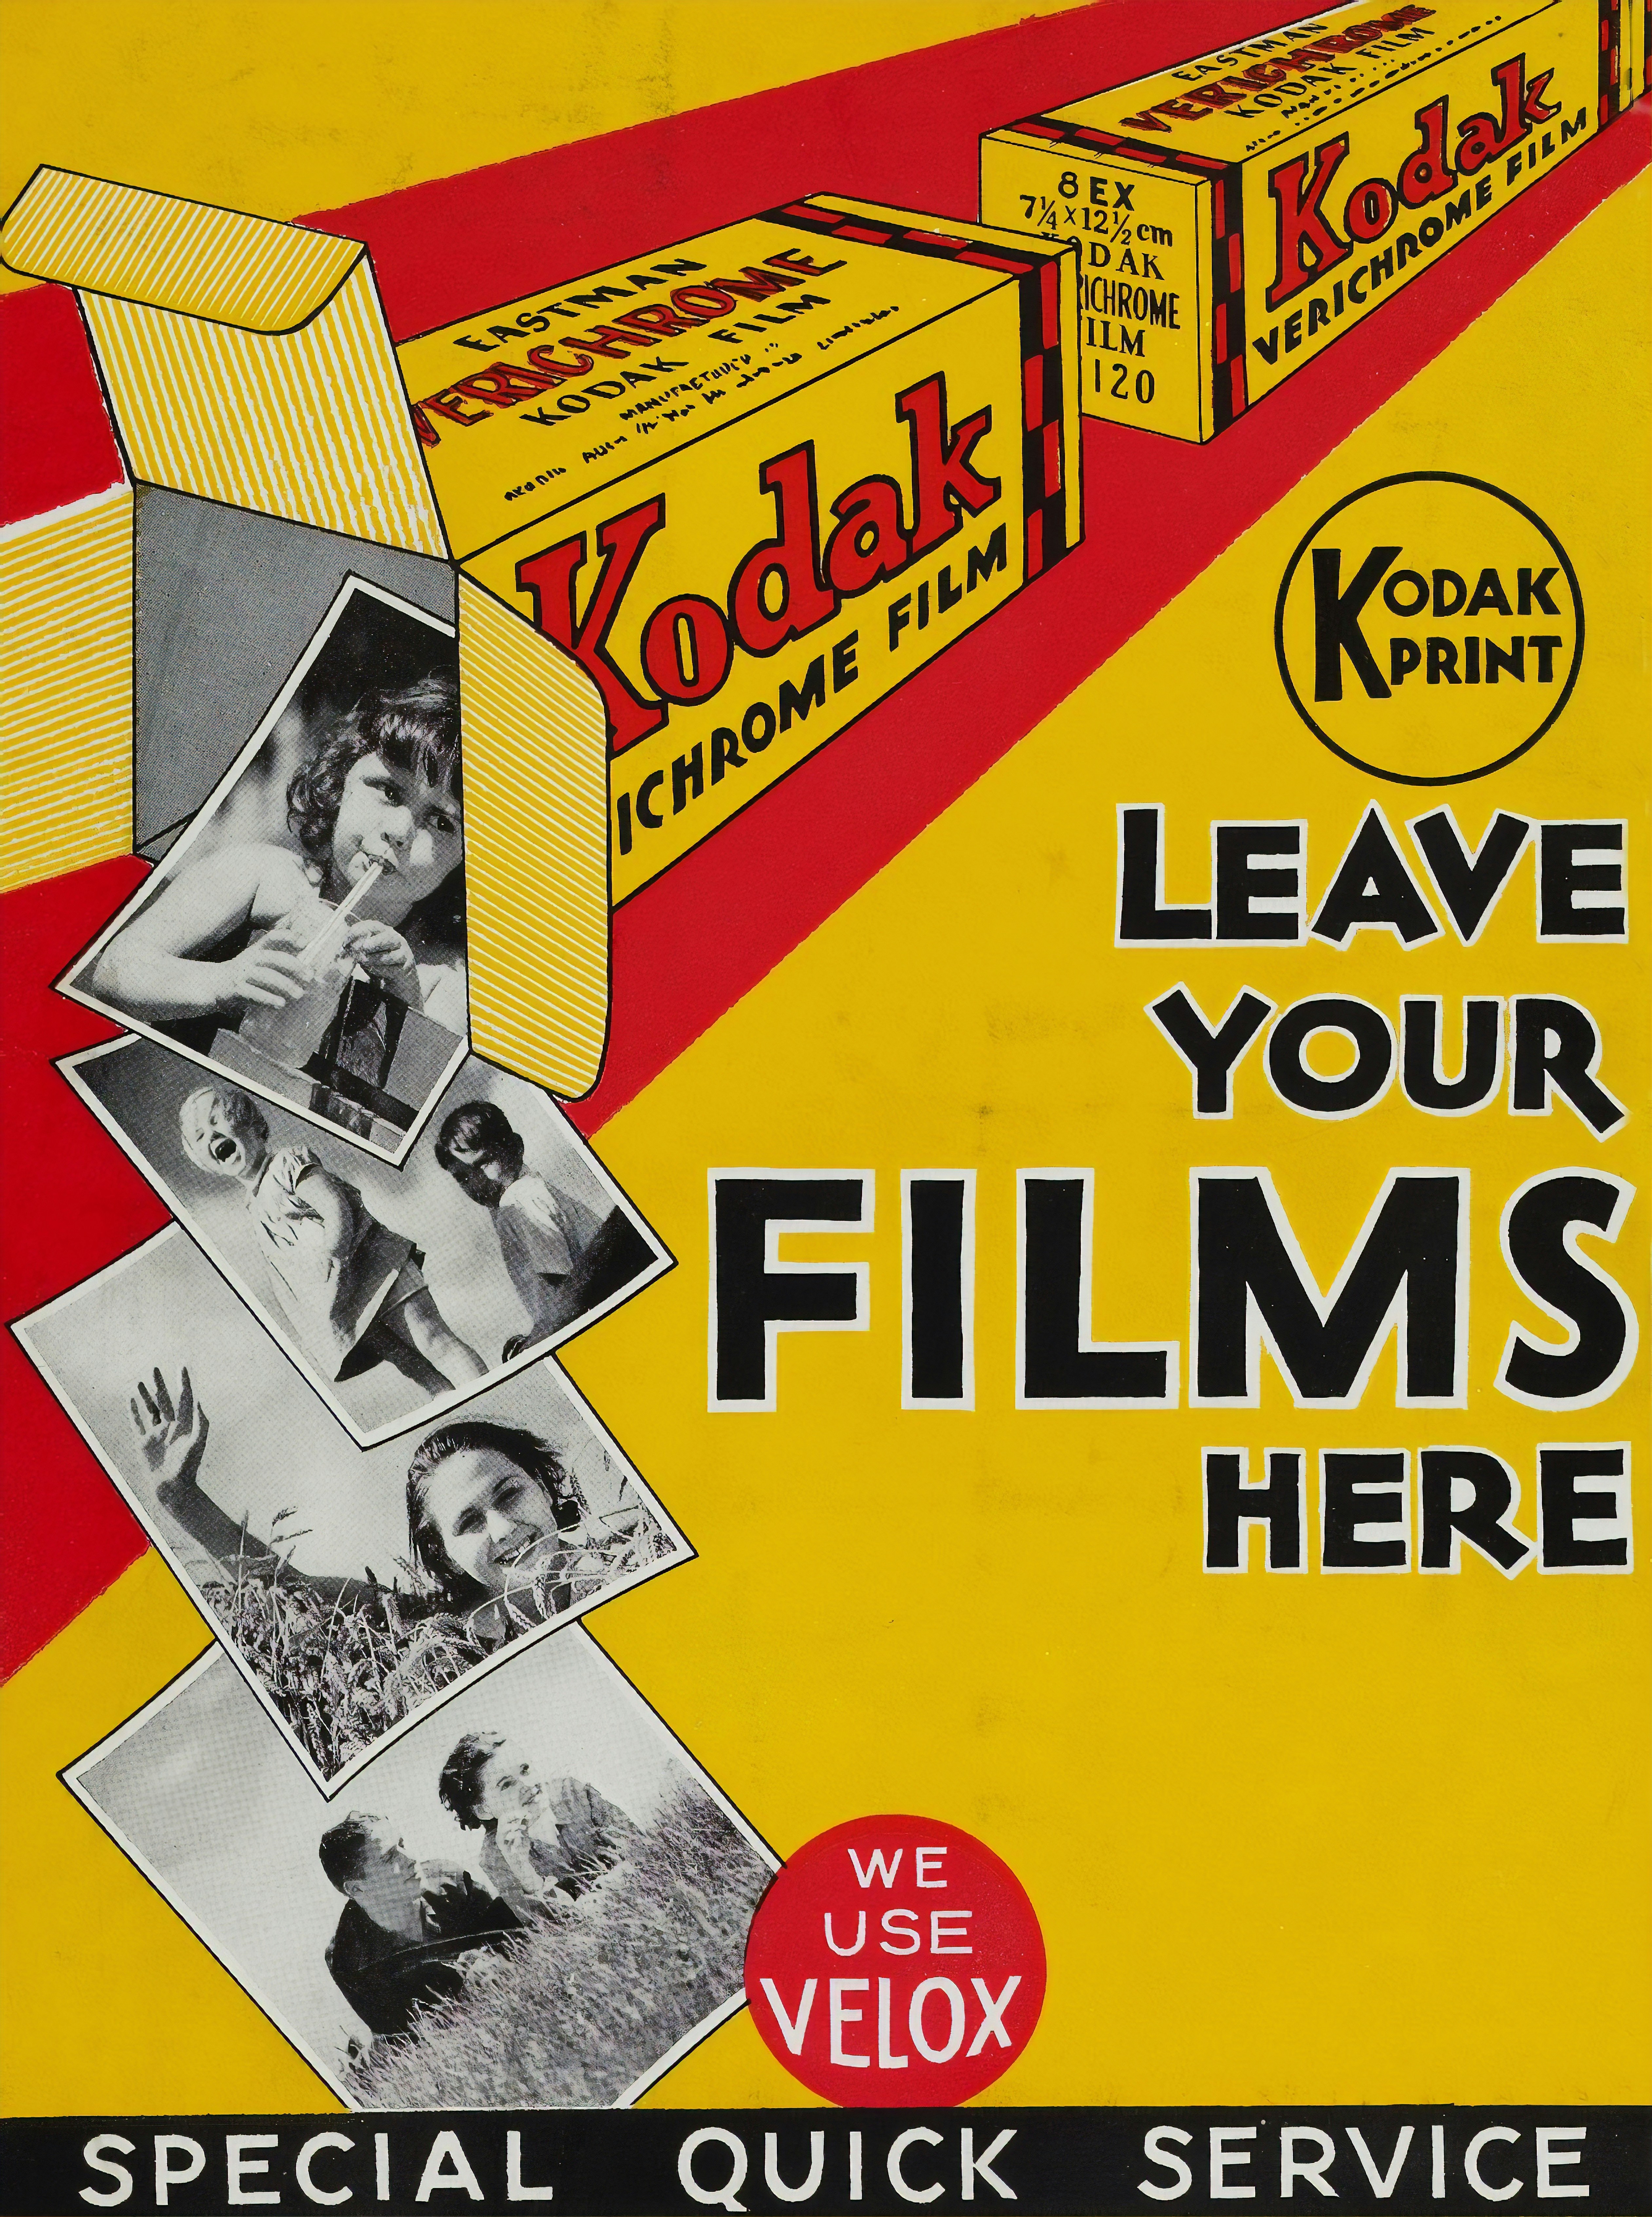 Poster - 'Leave Your Films Here'
Museums Victoria
Courtesy of Kodak (Australasia) Pty Ltd
https://collections.museumvictoria.com.au/items/1382983